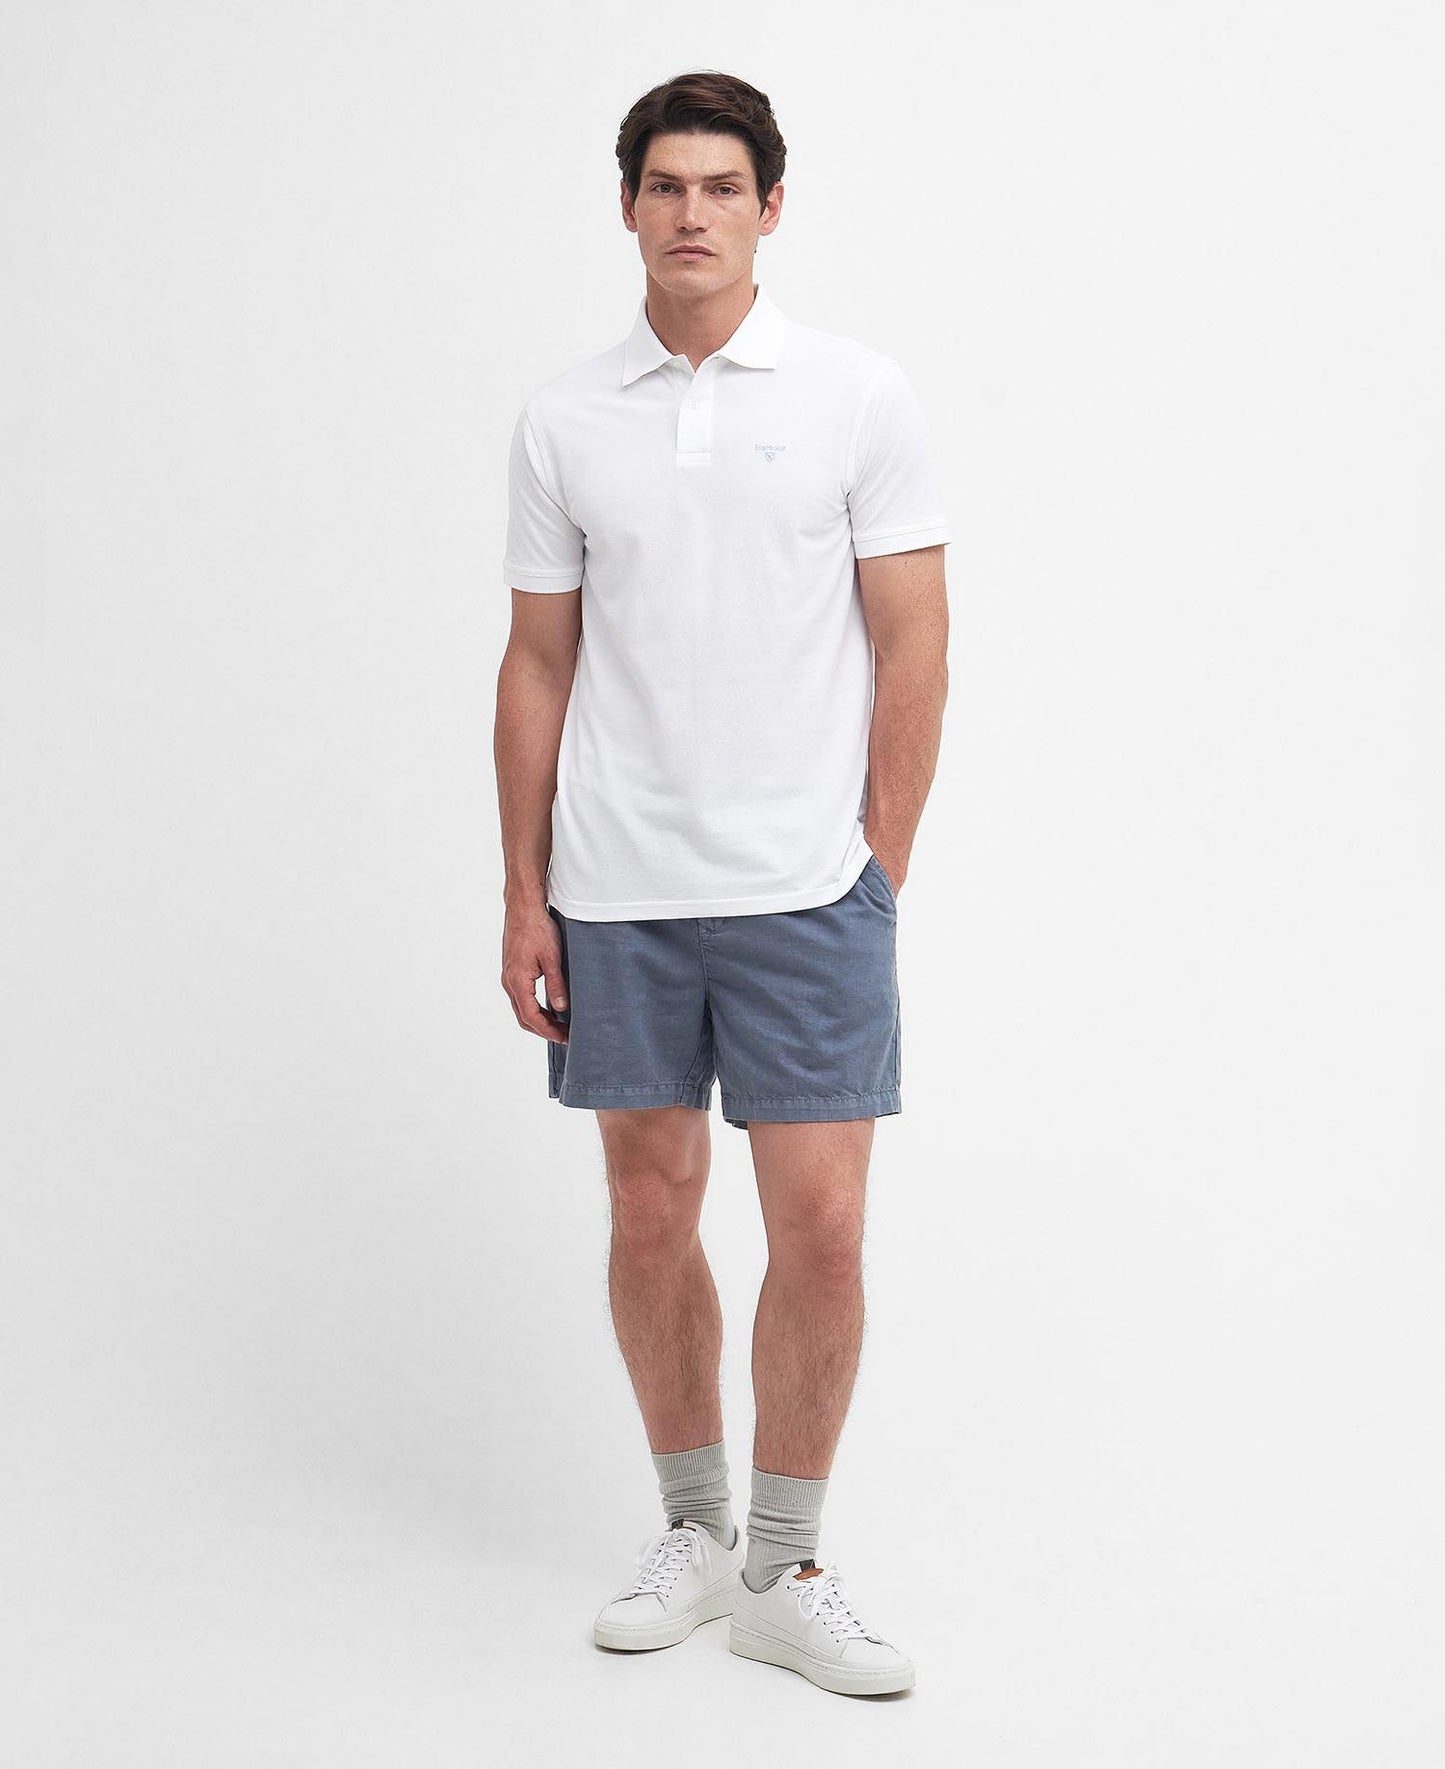 Barbour - Polo Sport - Blanc